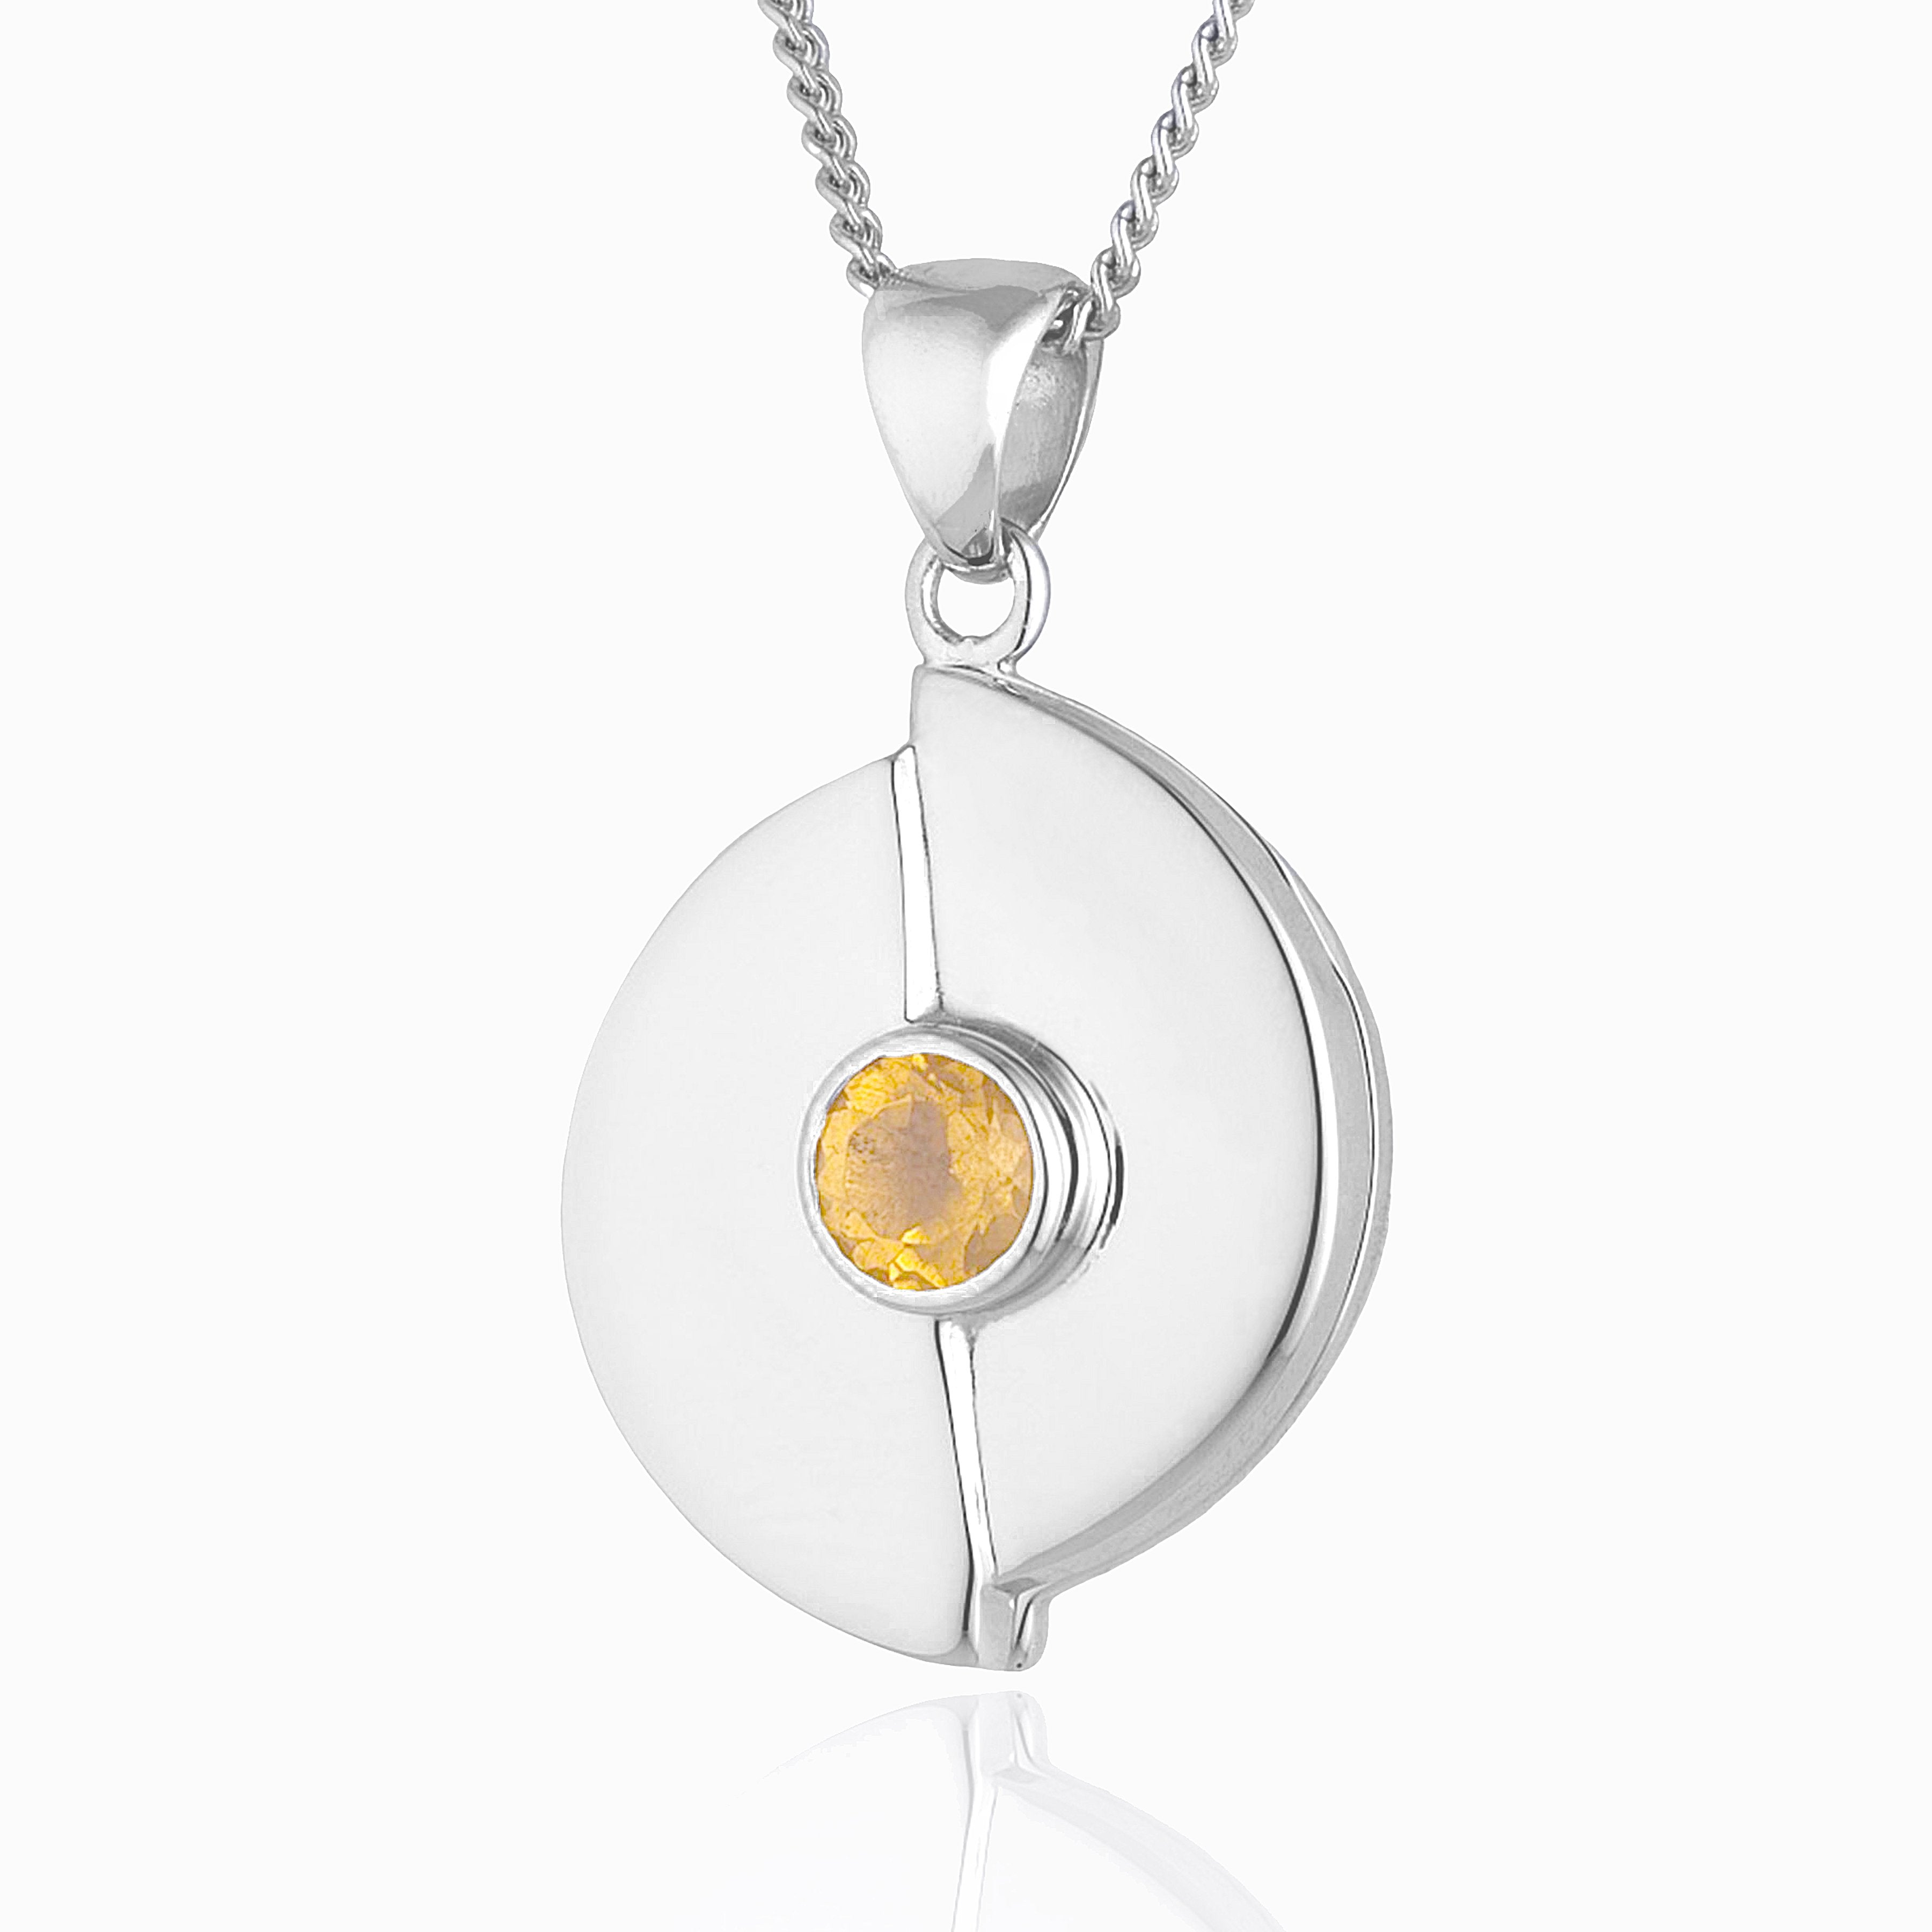 sterling silver round locket set with. yellow citrine, on a sterling silver curb chain